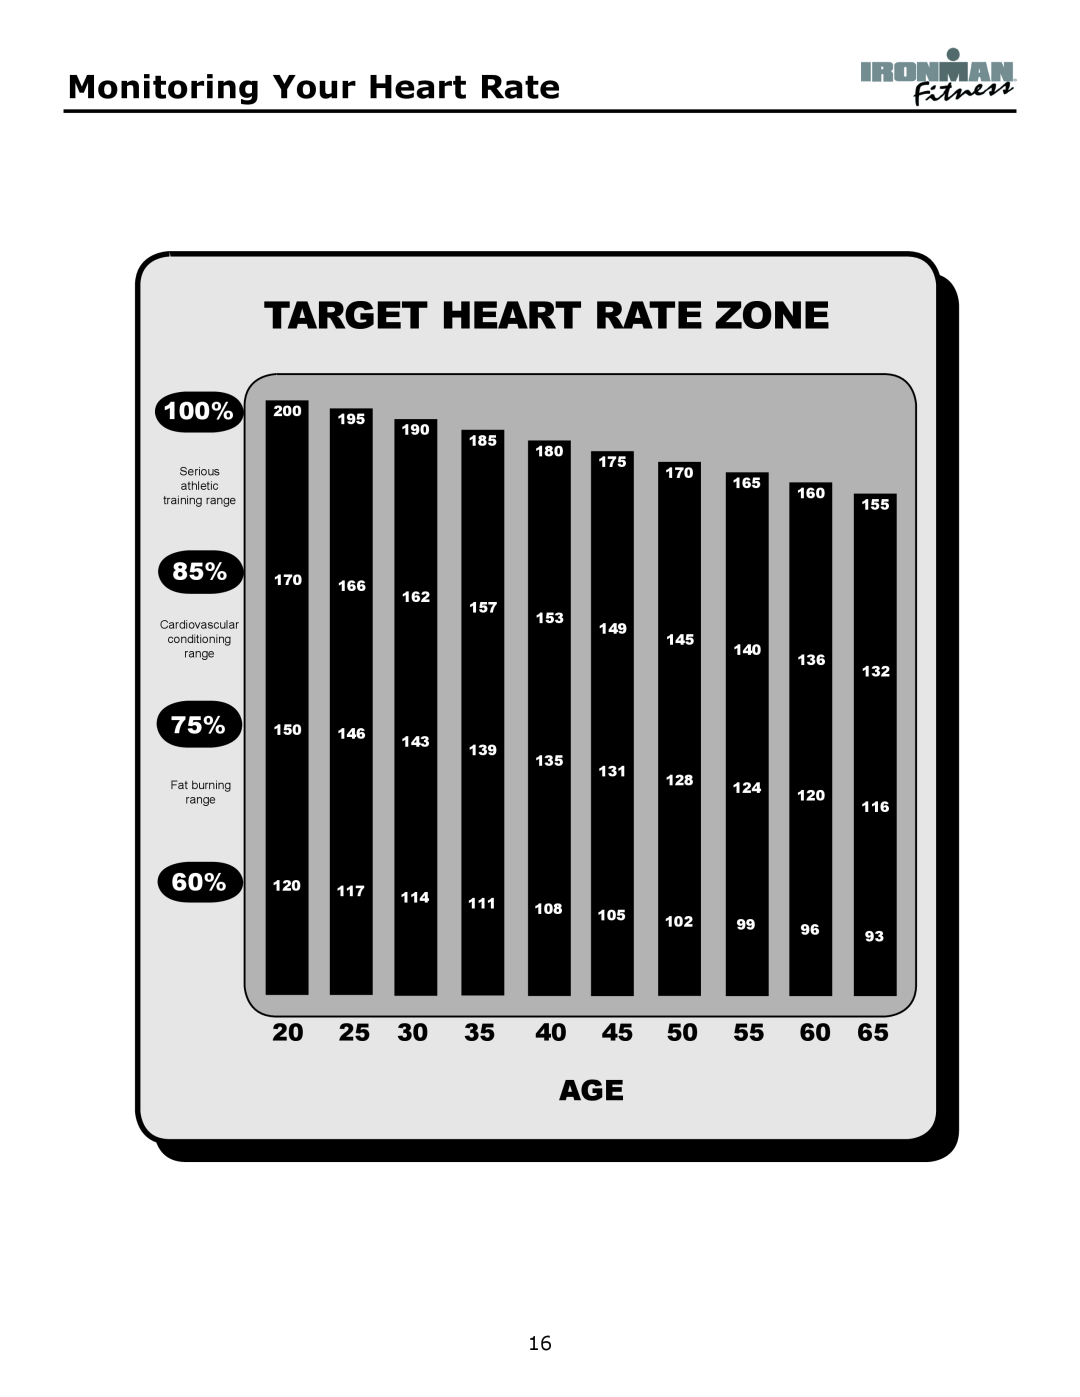 Ironman Fitness Envision owner manual Target Heart Rate Zone, Monitoring Your Heart Rate, 100%, 20 25 30 35 40 45 50 55 60 